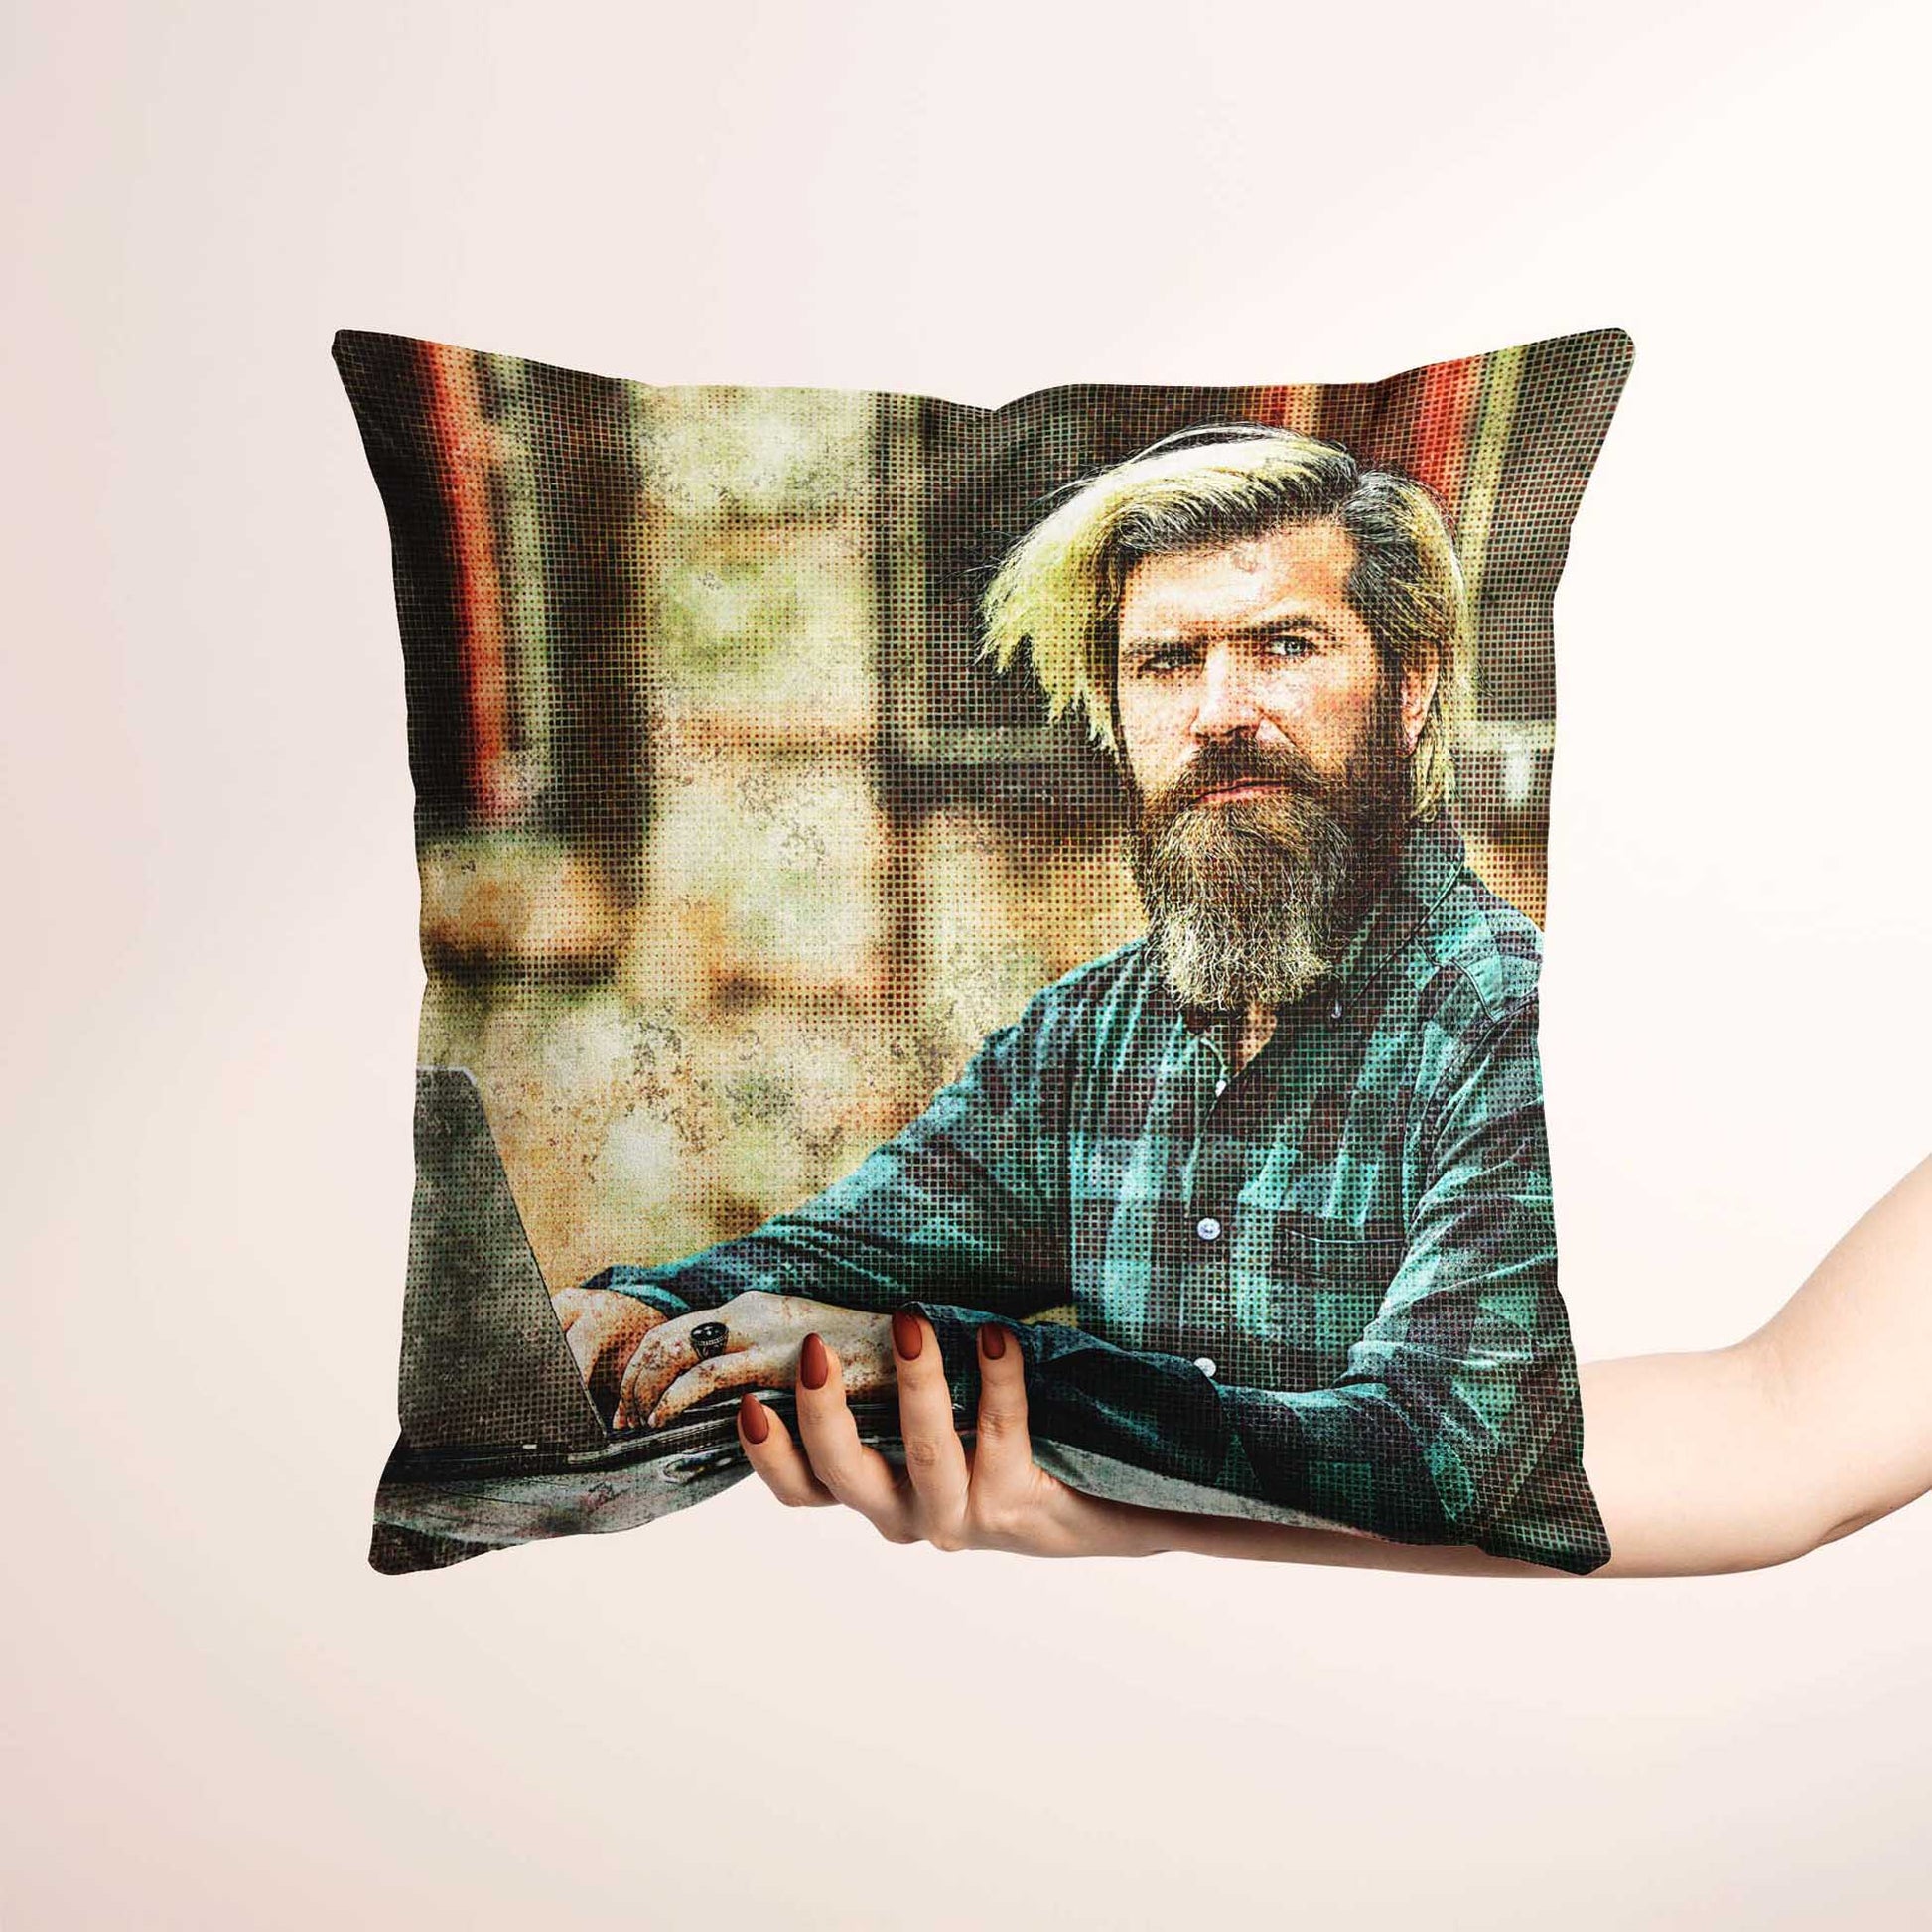 Revamp your interior design with the Personalised Grunge FX Cushion, an artistic gem for your home. Featuring a distressed print from your photo, this cushion brings a unique and creative atmosphere. Handmade with soft velvet